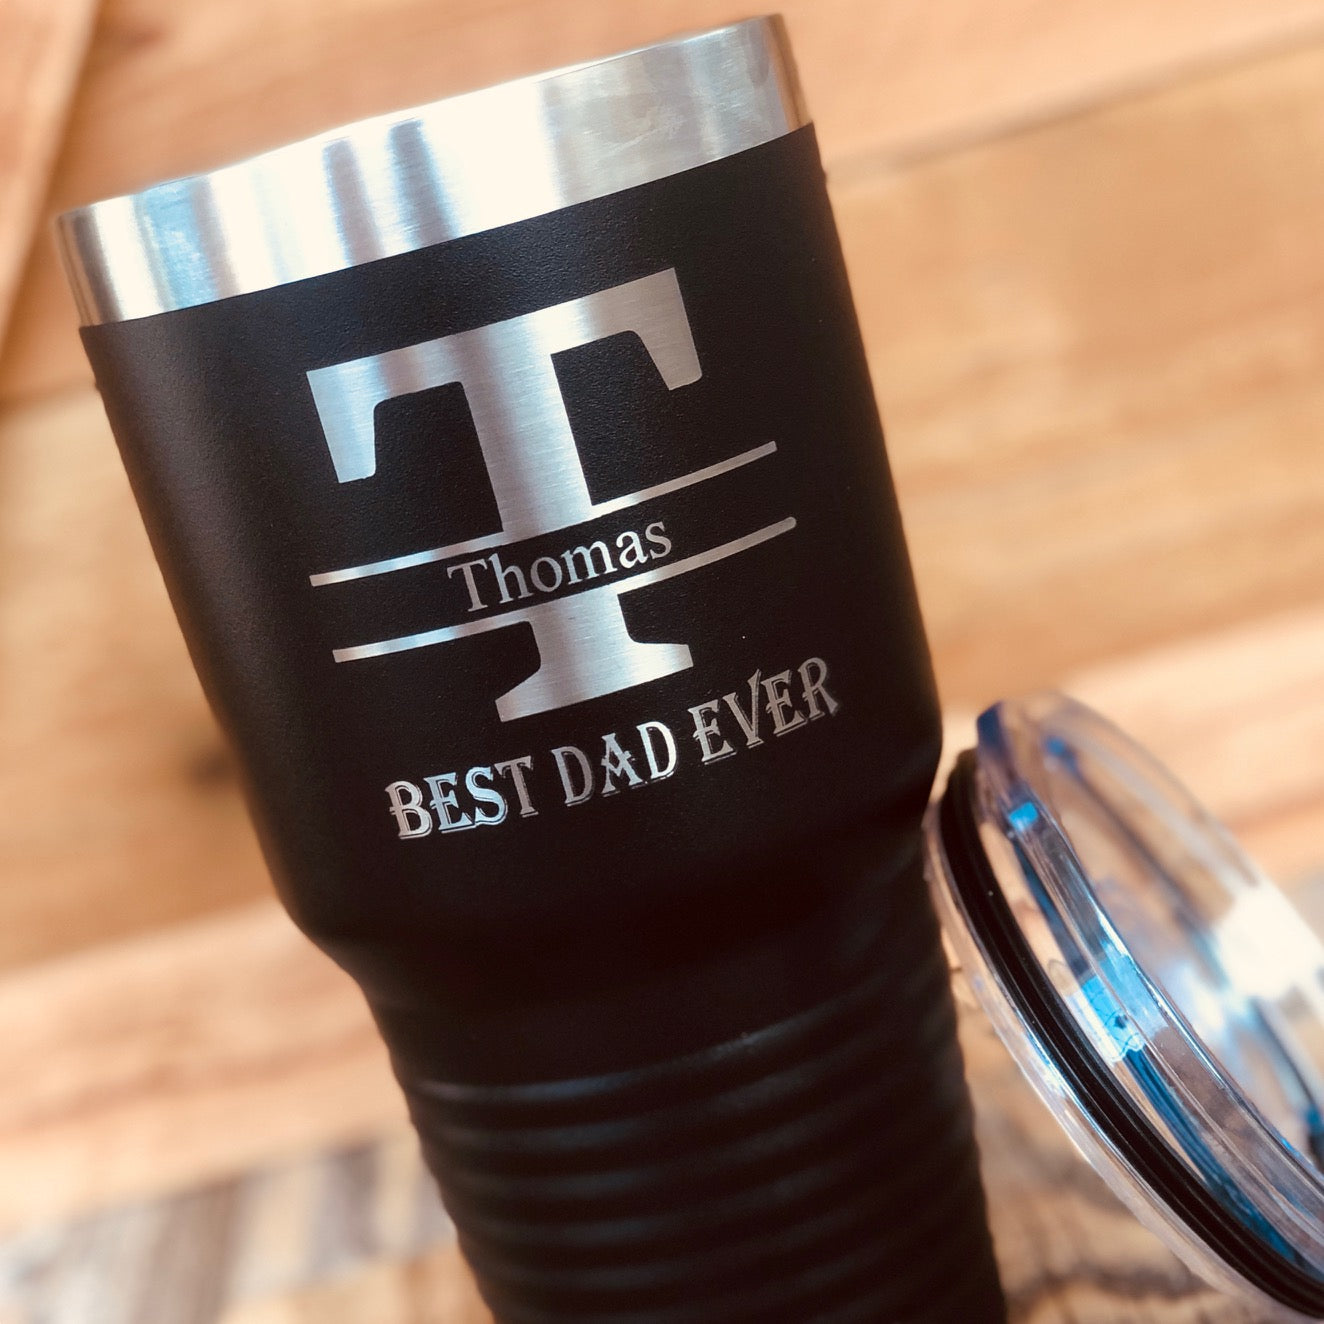 Valentines Day Tumbler With Love You Most Design - Groovy Guy Gifts